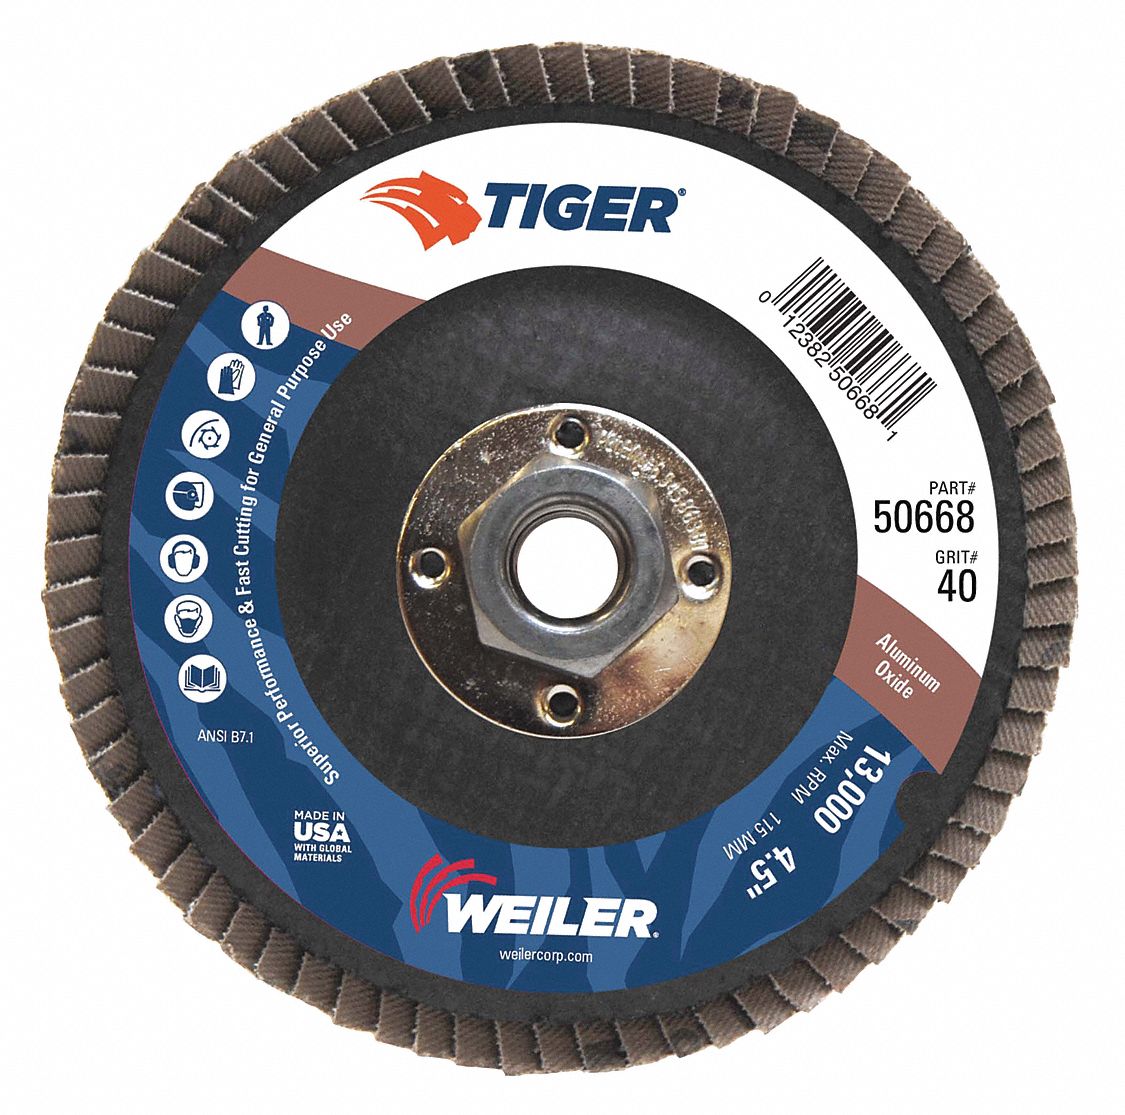 38P566 - 50668 Weiler Disks - Only Shipped in Quantities of 10